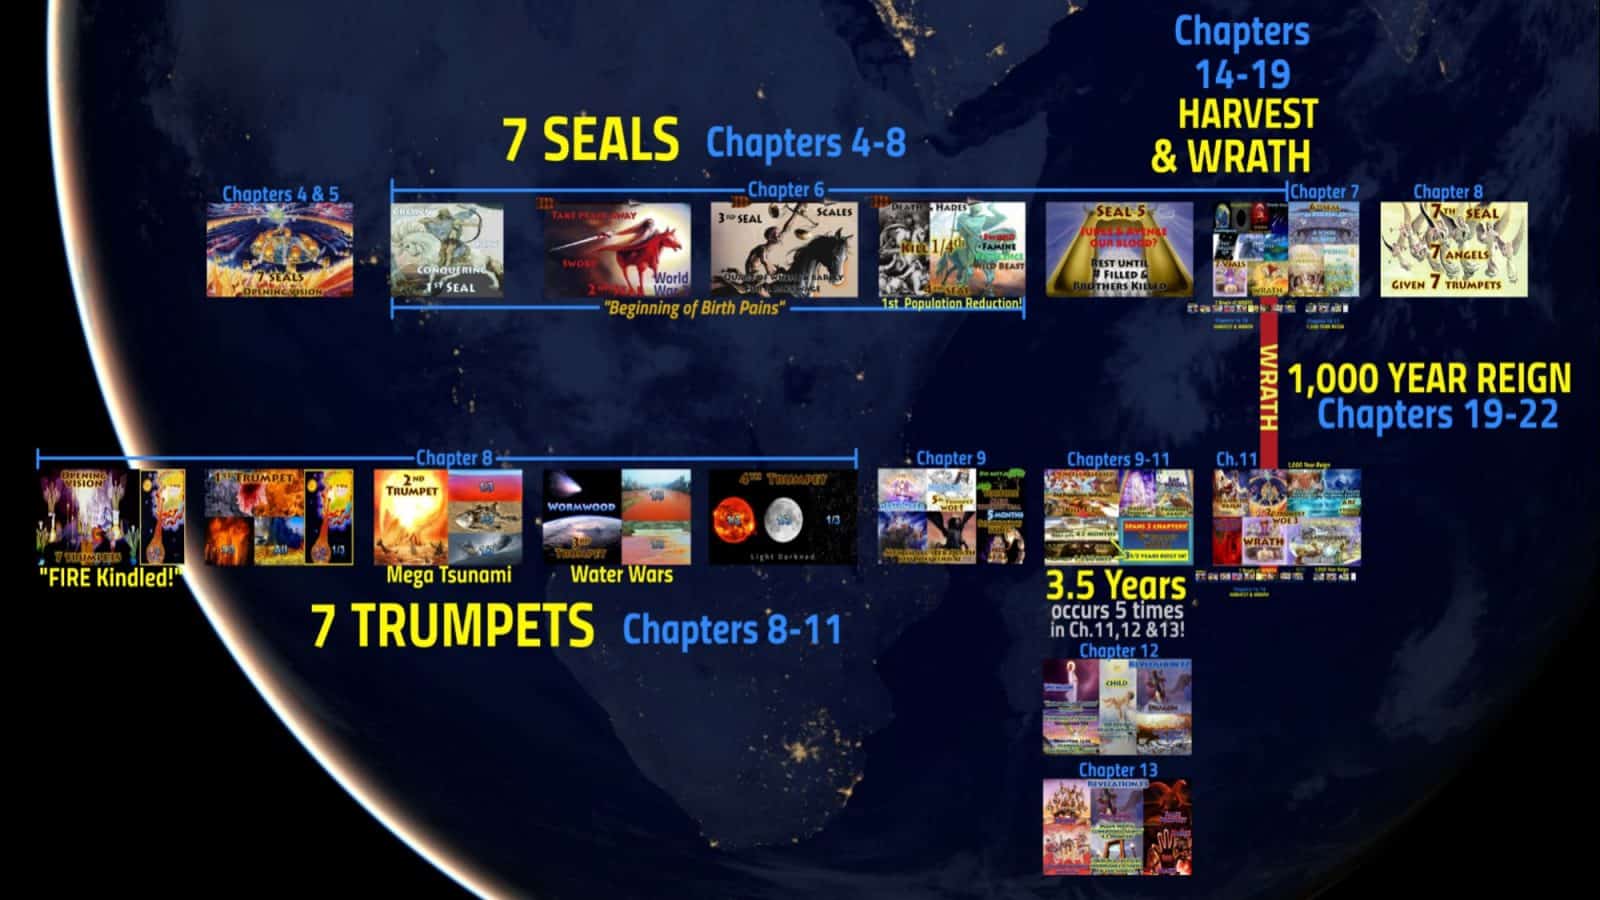 Revelation Virtual Map,Book of Revelation,all 22 chapters,visual,big picture,virtual map,all 22 chapters,4 Horsemen, four Horsemen, apocalypse, beginning-of-birth-pains, Beginning of Sorrows, Matthew 24, book-of-revelation, death, famine, first-seal, four-horsemen-of-the-apocalypse, fourth-seal, green, hades, death, horse, hunger, kill-14, pale-green, pestilence, plague, Red Horse, second-seal, third-seal, white Horse, Bow, Crown, Conquering, wild-beasts, sword, Take Peace awar, War, Third Seal, Famine, Hunger, Balances, Scales, Ezekiel 14, Deuteronomy 32, Revelation 6, Jeremiah 14, Jeremiah 15, Jeremiah 16, Leviticus 26, Ezekiel 14,Jesus,Sickle,Harvest,Grape,Winepress,Blood,angels,reap,Wrath,Sixth Seal,Seventh Trumpet,Seven Vials of Wrath,Seven Bowls of Wrath,Seven Vials,Seven Bowls,Wrath,Lord's Day,Day of the Lord,Book of Revelation,Revelation of Jesus Christ,Last Days,End Times,Population Reduction,Blood,Horses bridle,1600 stadia,Winepress,Jesus,Yahshua,Christ,King of Kings,Lord of Lord's,White Horse,Armies of Heaven,Army of Heaven,Sword out of Mouth,Strike Nations,Rod of Iron,Wine-press,Word of God,Faithful,True,War,Many Crowns,Great Supper of God,Eat Flesh,Armageddon,6th Vial,Sixth Vial,Alien Invasion,Wrath,beast,kings of earth,destroyed,judgment,Revelation 19,Grape Harvest,Revelation 14,Revelation 16,Bow,Arrow,Crown,Many Crowns,New Jerusalem,Wife,Bride,Wife of the Lamb,Holy City,New Heavens,New Earth,Square,12000 Stadia,1400 miles,cube,square,down out of heaven,no tears,no death,all things new,12 gates,12 Apostles,12 Tribes of Israel,12 Foundation Stones,144 cubits,12 Angels,Revelation 21,Babylon the Great,Harlot,Prostitute,Fornication,Sexual Immorality,Kings,Drunk with Blood of Saints,Cup,Rich,Luxury,Fall of Babylon,10 Kings,Burn with Fire,Destroy,Judge,Revelation 14,Revelation 17,Revelation 18,Revelation 19,Revelation 13,Beast,Image,Mark,Woman,Pregnant,12 Stars,Clothed Sun,Moon,Birth,Male Child,Child, Rule Nations,Rod of Iron,New Jerusalem,Revelation 12,Agony,Pain, Dragon,devour child,serpent,third stars,7 Seals,Book of Revelation,Seven Seals,First Seal,Second Seal,Third Seal,Fourth Seal,Fifth Seal,Sixth Seal,Seventh Seal,Chapter 4,Chapter 5,Chapter 6,Chapter 7,7 Trumpets,Seven Trumpets,First Trumpet,Second Trumpet,Third Trumpet,Fourth Trumpet,Fifth Trumpet,Sixth Trumpet,Seventh Trumpet,Book of Revelation,Picture Gallery,Album,Chapter 8,Chapter 9,Chapter 10,Chapter 11,Seven Vials of Wrath,7 Vials,7 Bowls,Seven Bowls,wrath,Picture Gallery,Book of Revelation,First Vial,Second Vial,Third Vial,Fourth Vial,Fifth Vial,Sixth Vial,Seventh Vial,Chapter 15,Chapter 16,Chapter 19,Armageddon,7 Bowls of Wrath,First Bowl,Second Bowl,Third Bowl,Fourth Bowl,Fifth Bowl,Sixth Bowl,Seventh Bowl,Pictures,Picture Gallery,Visual